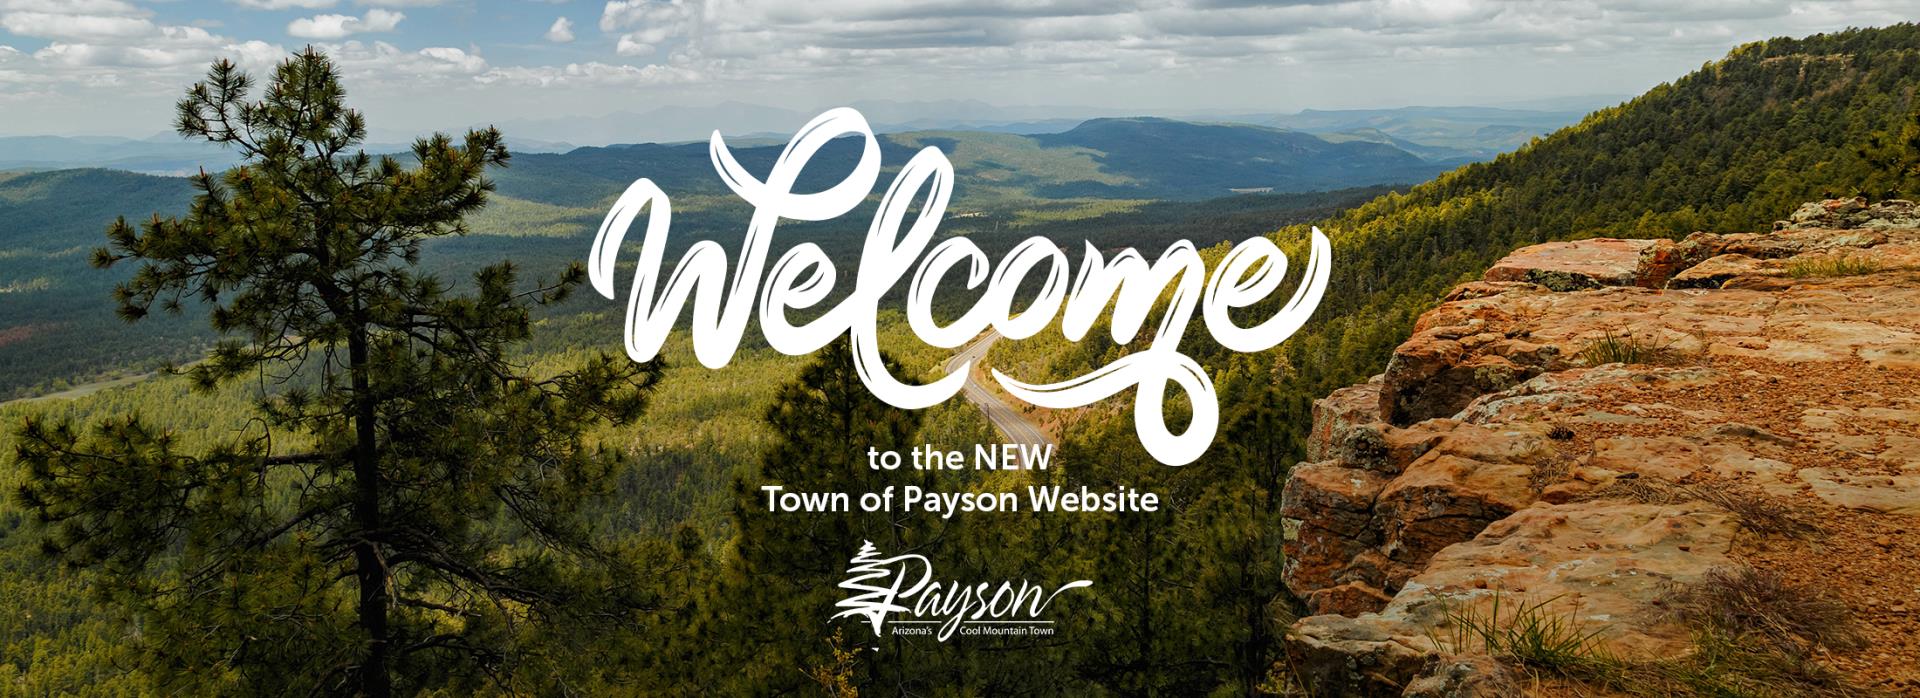 Welcome to Town of Payson New Website